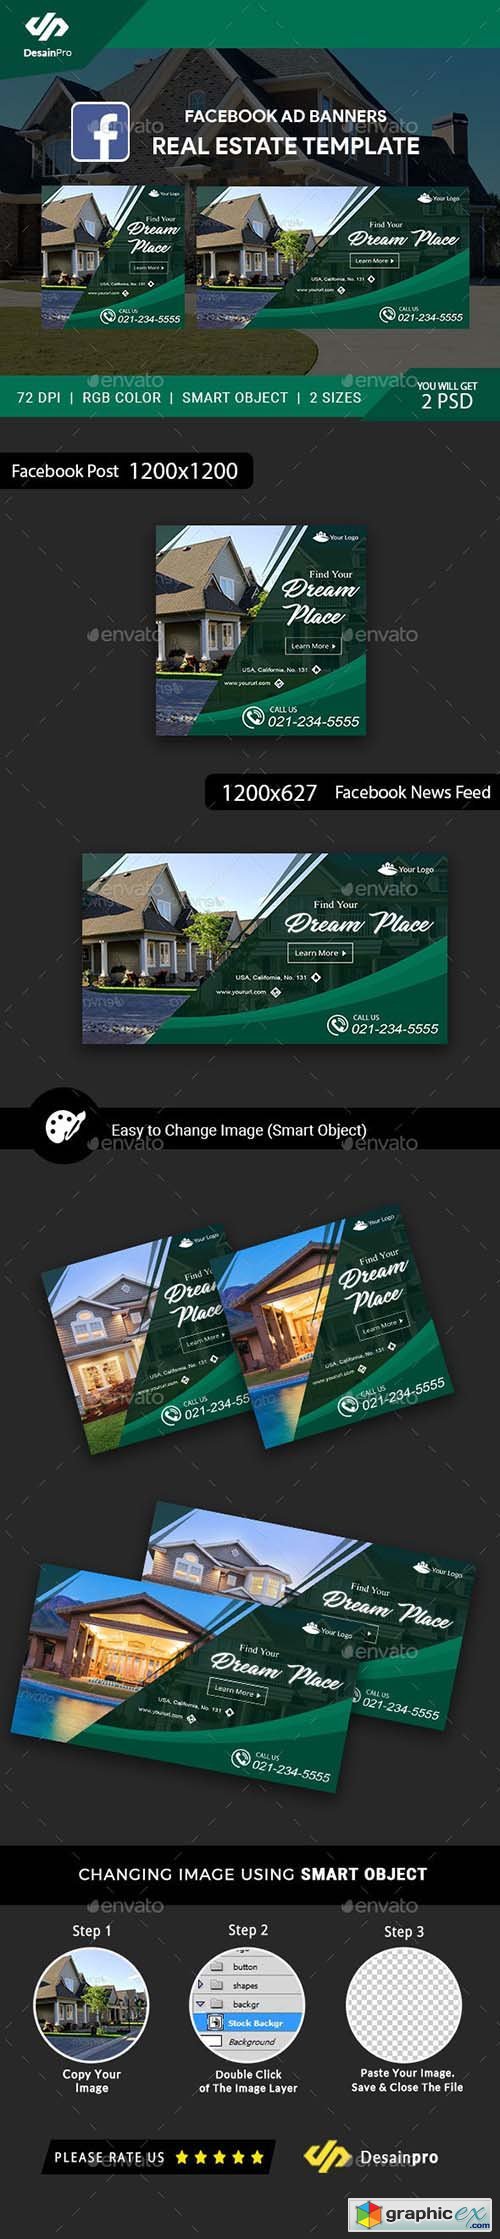 Real Estate FB Ad Banners - AR